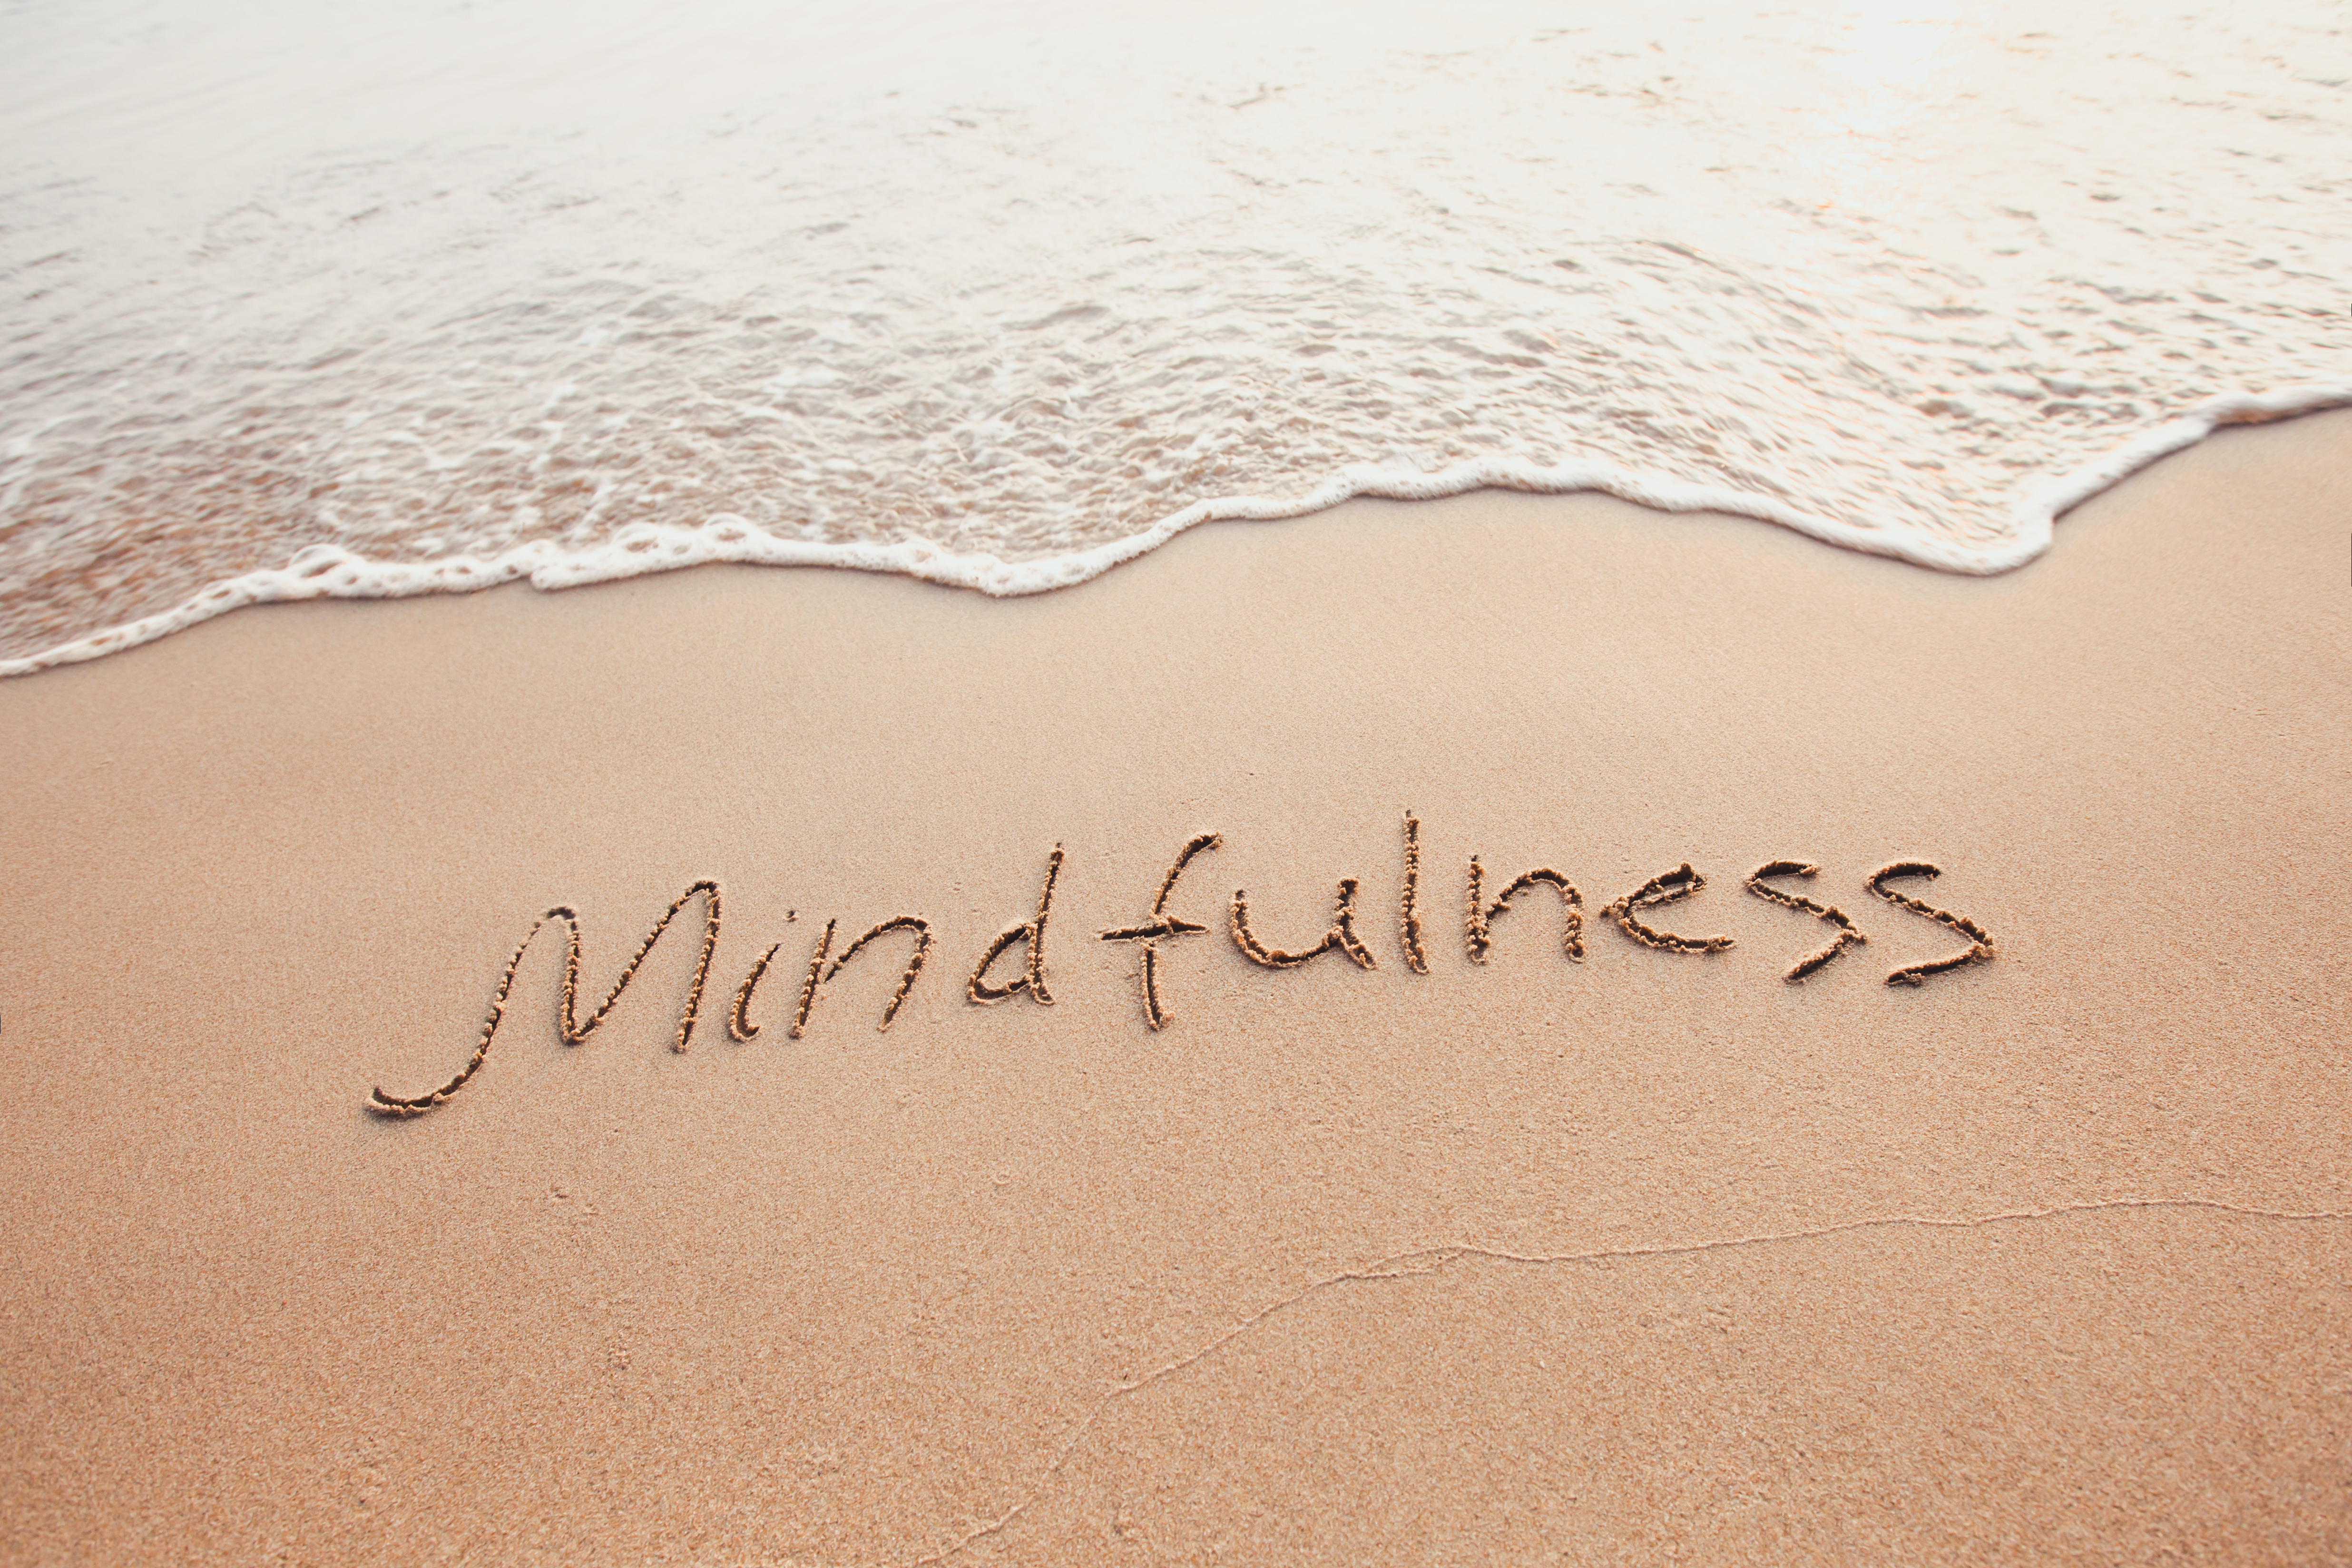 Mindfulness written in the sand